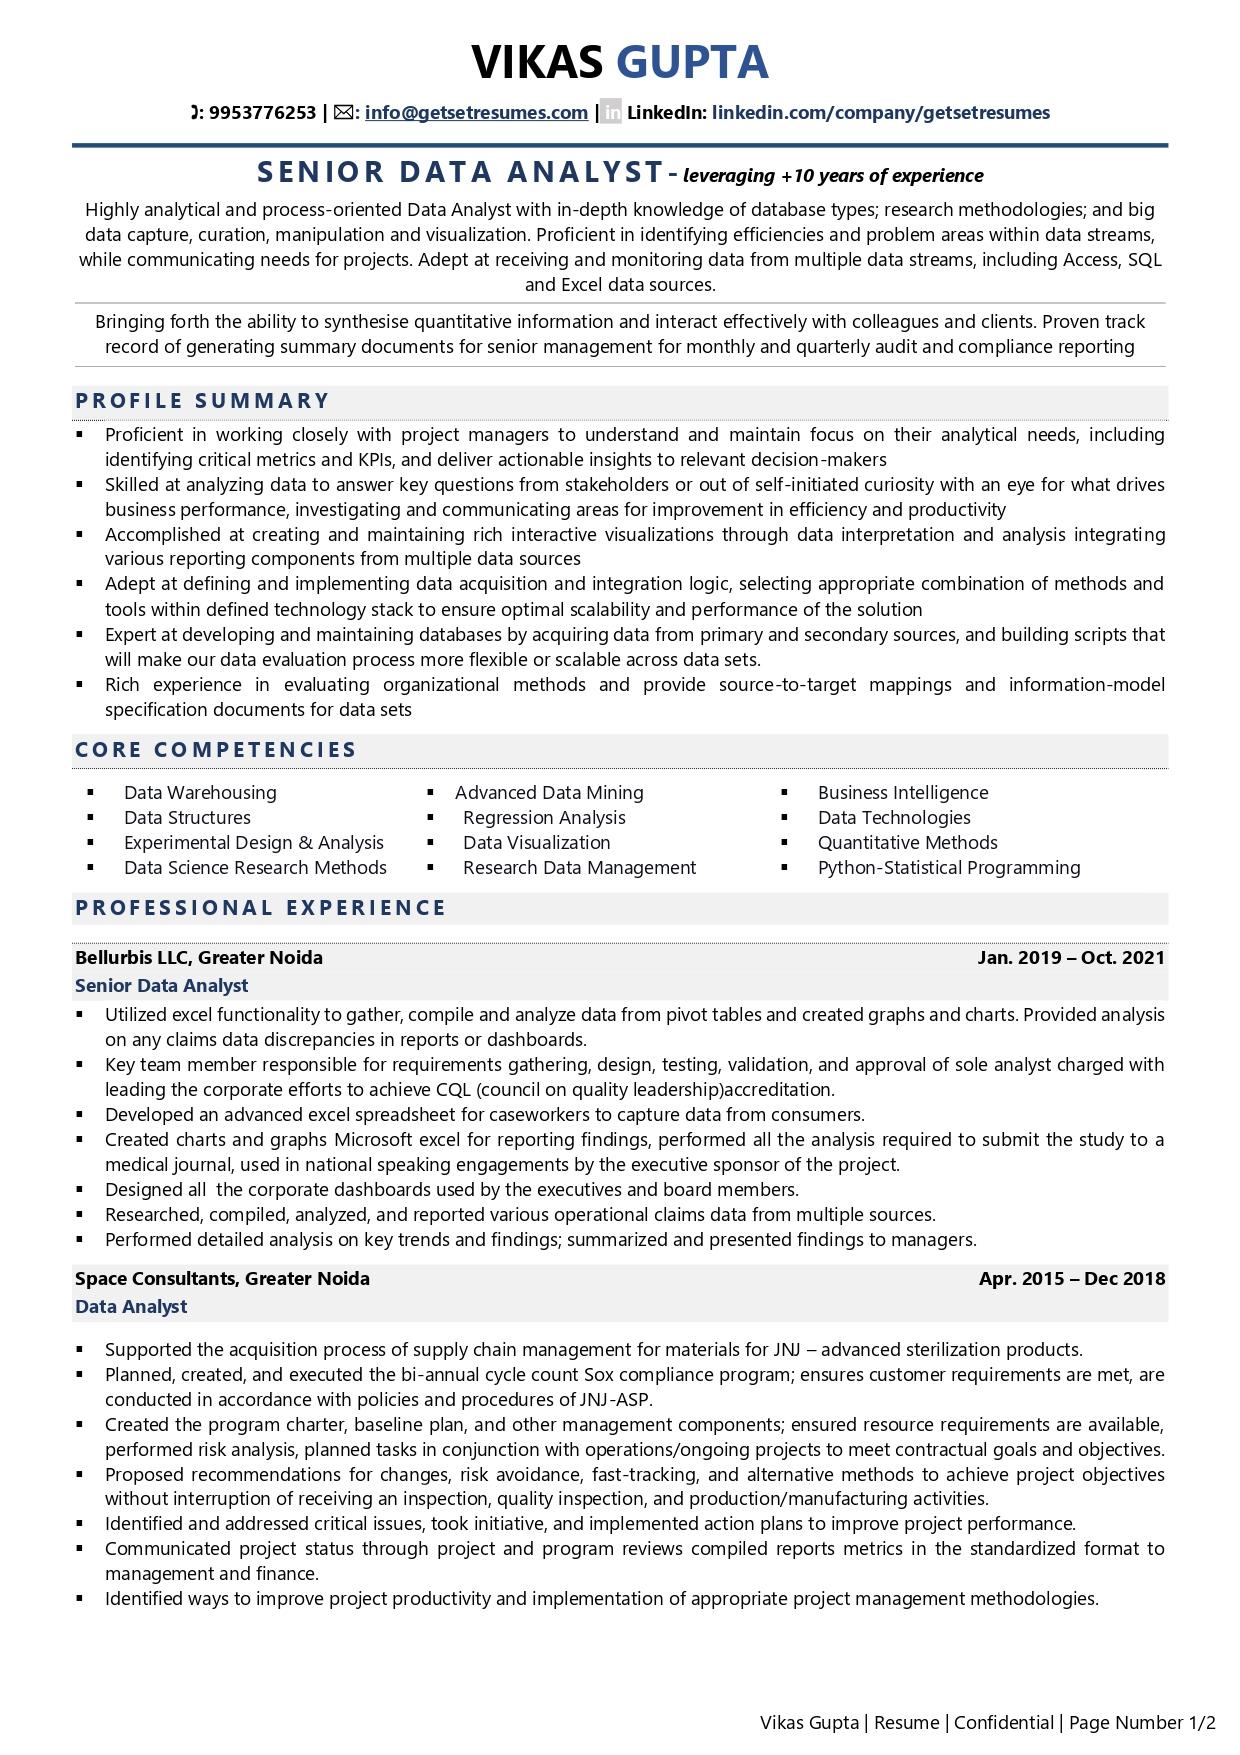 Data Analyst - Resume Example & Template